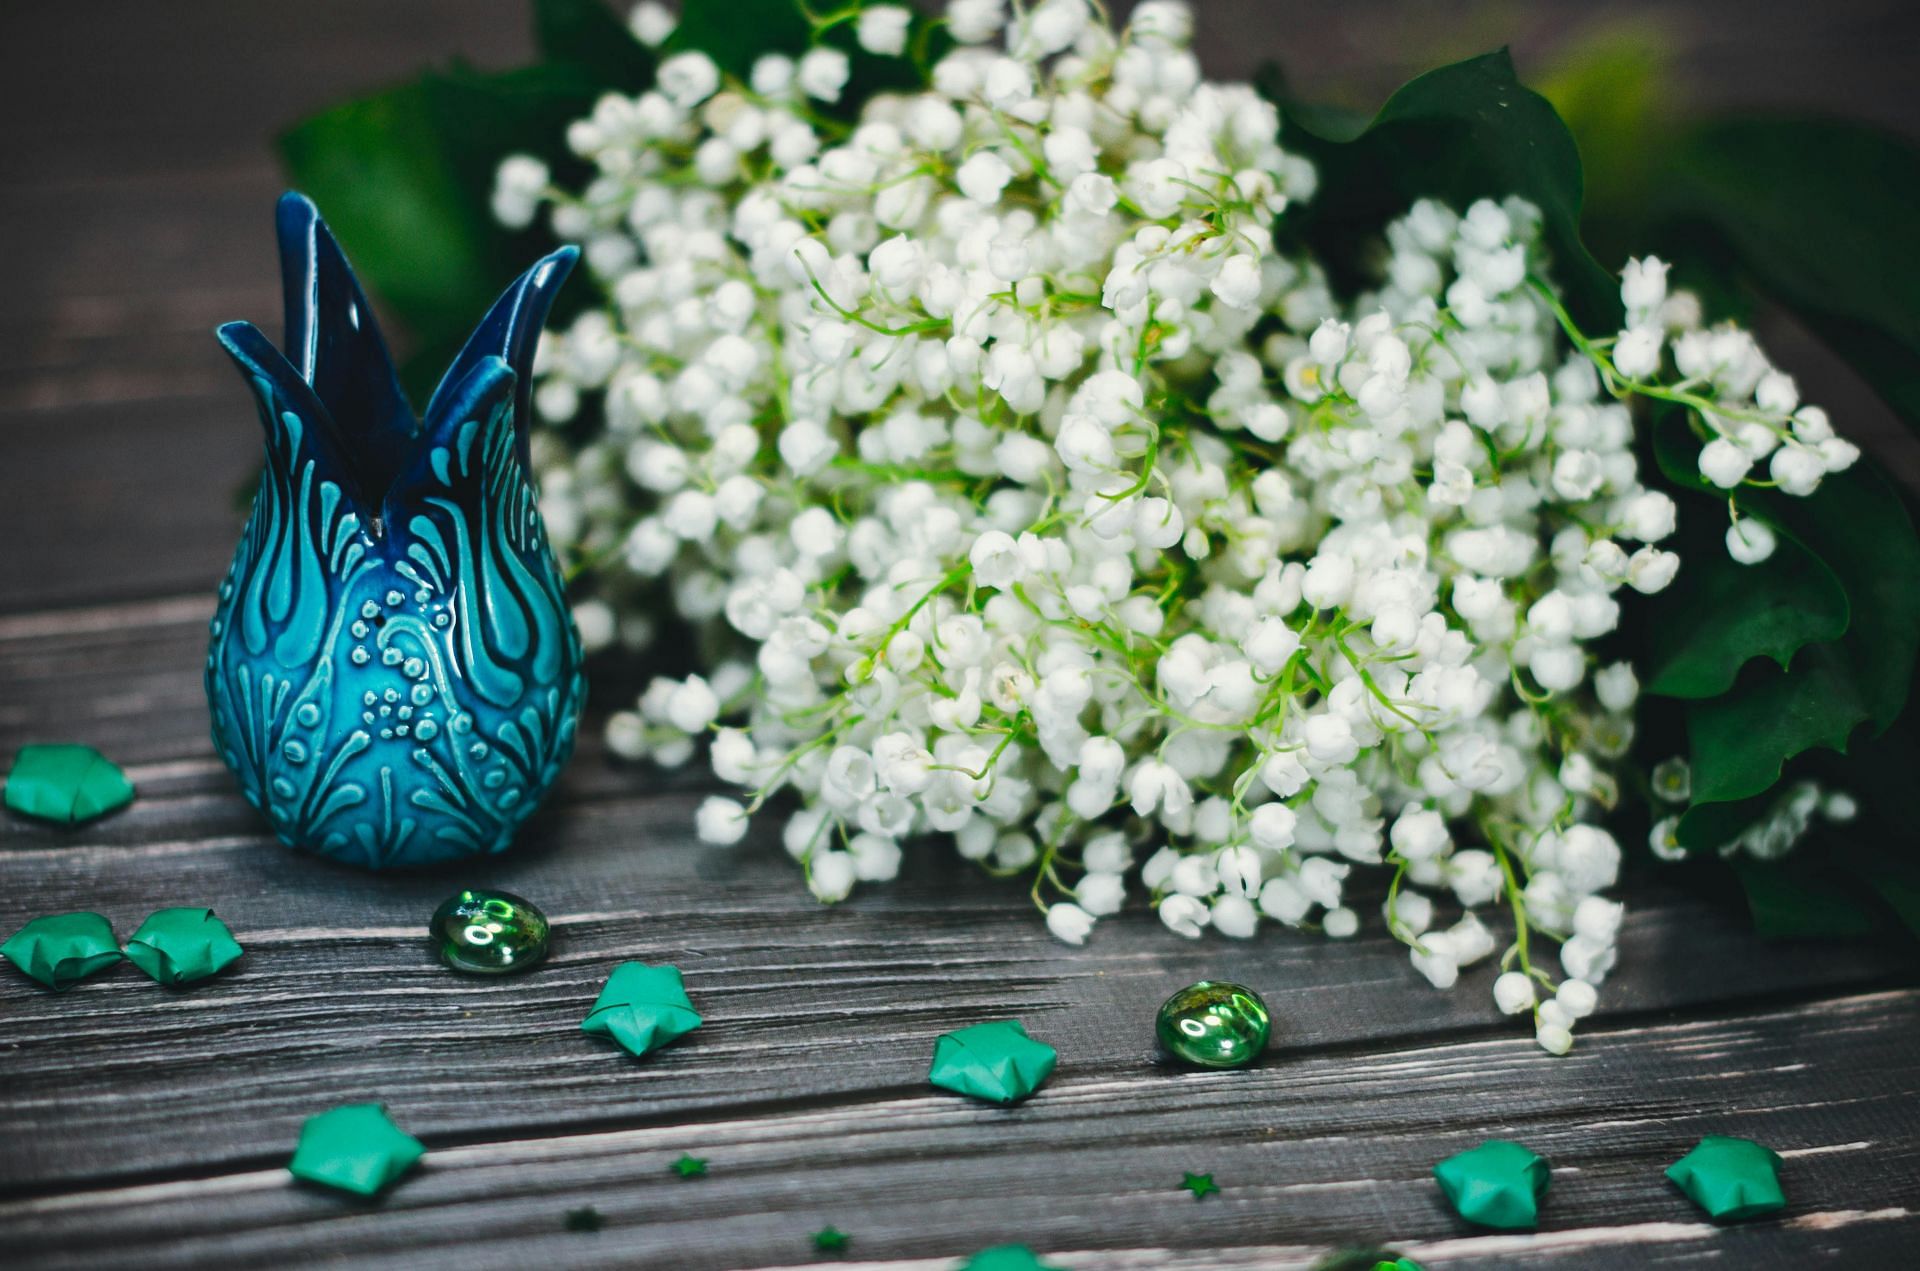 Missouri women poisons husband with lily of the valley (image via Pexels)